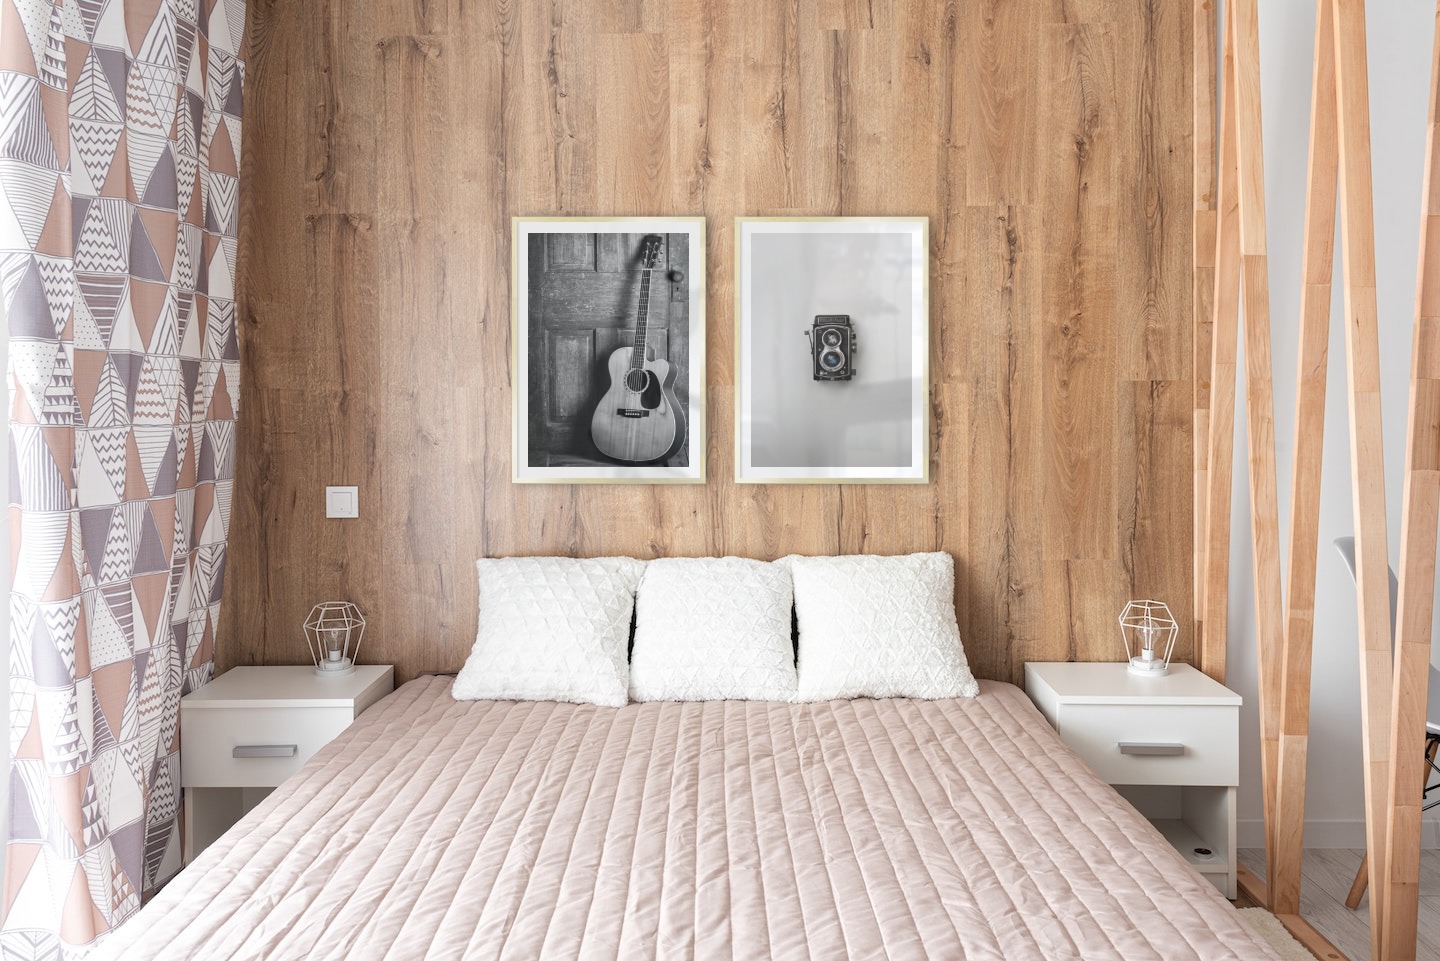 Gallery wall with picture frames in gold in sizes 50x70 with prints "Guitar" and "Camera"